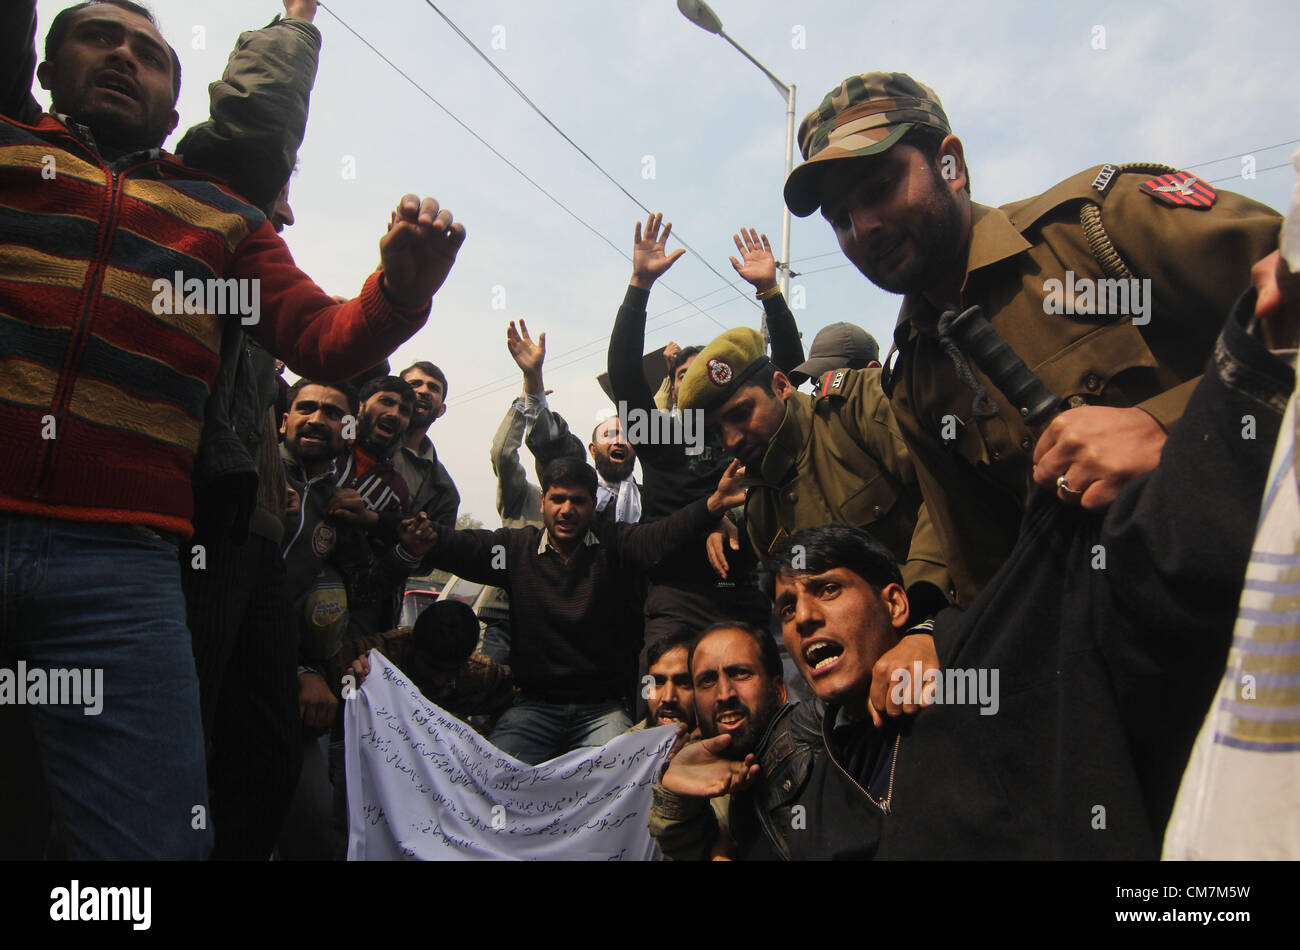 Oct. 23, 2012 - Srinagar, Kashmir - Indian police detain class four employees of the Health Department during a protest. The protesters alleged that their pay has been with withheld for unknown reasons. (Credit Image: © Altaf Zargar/ZUMAPRESS.com) Stock Photo